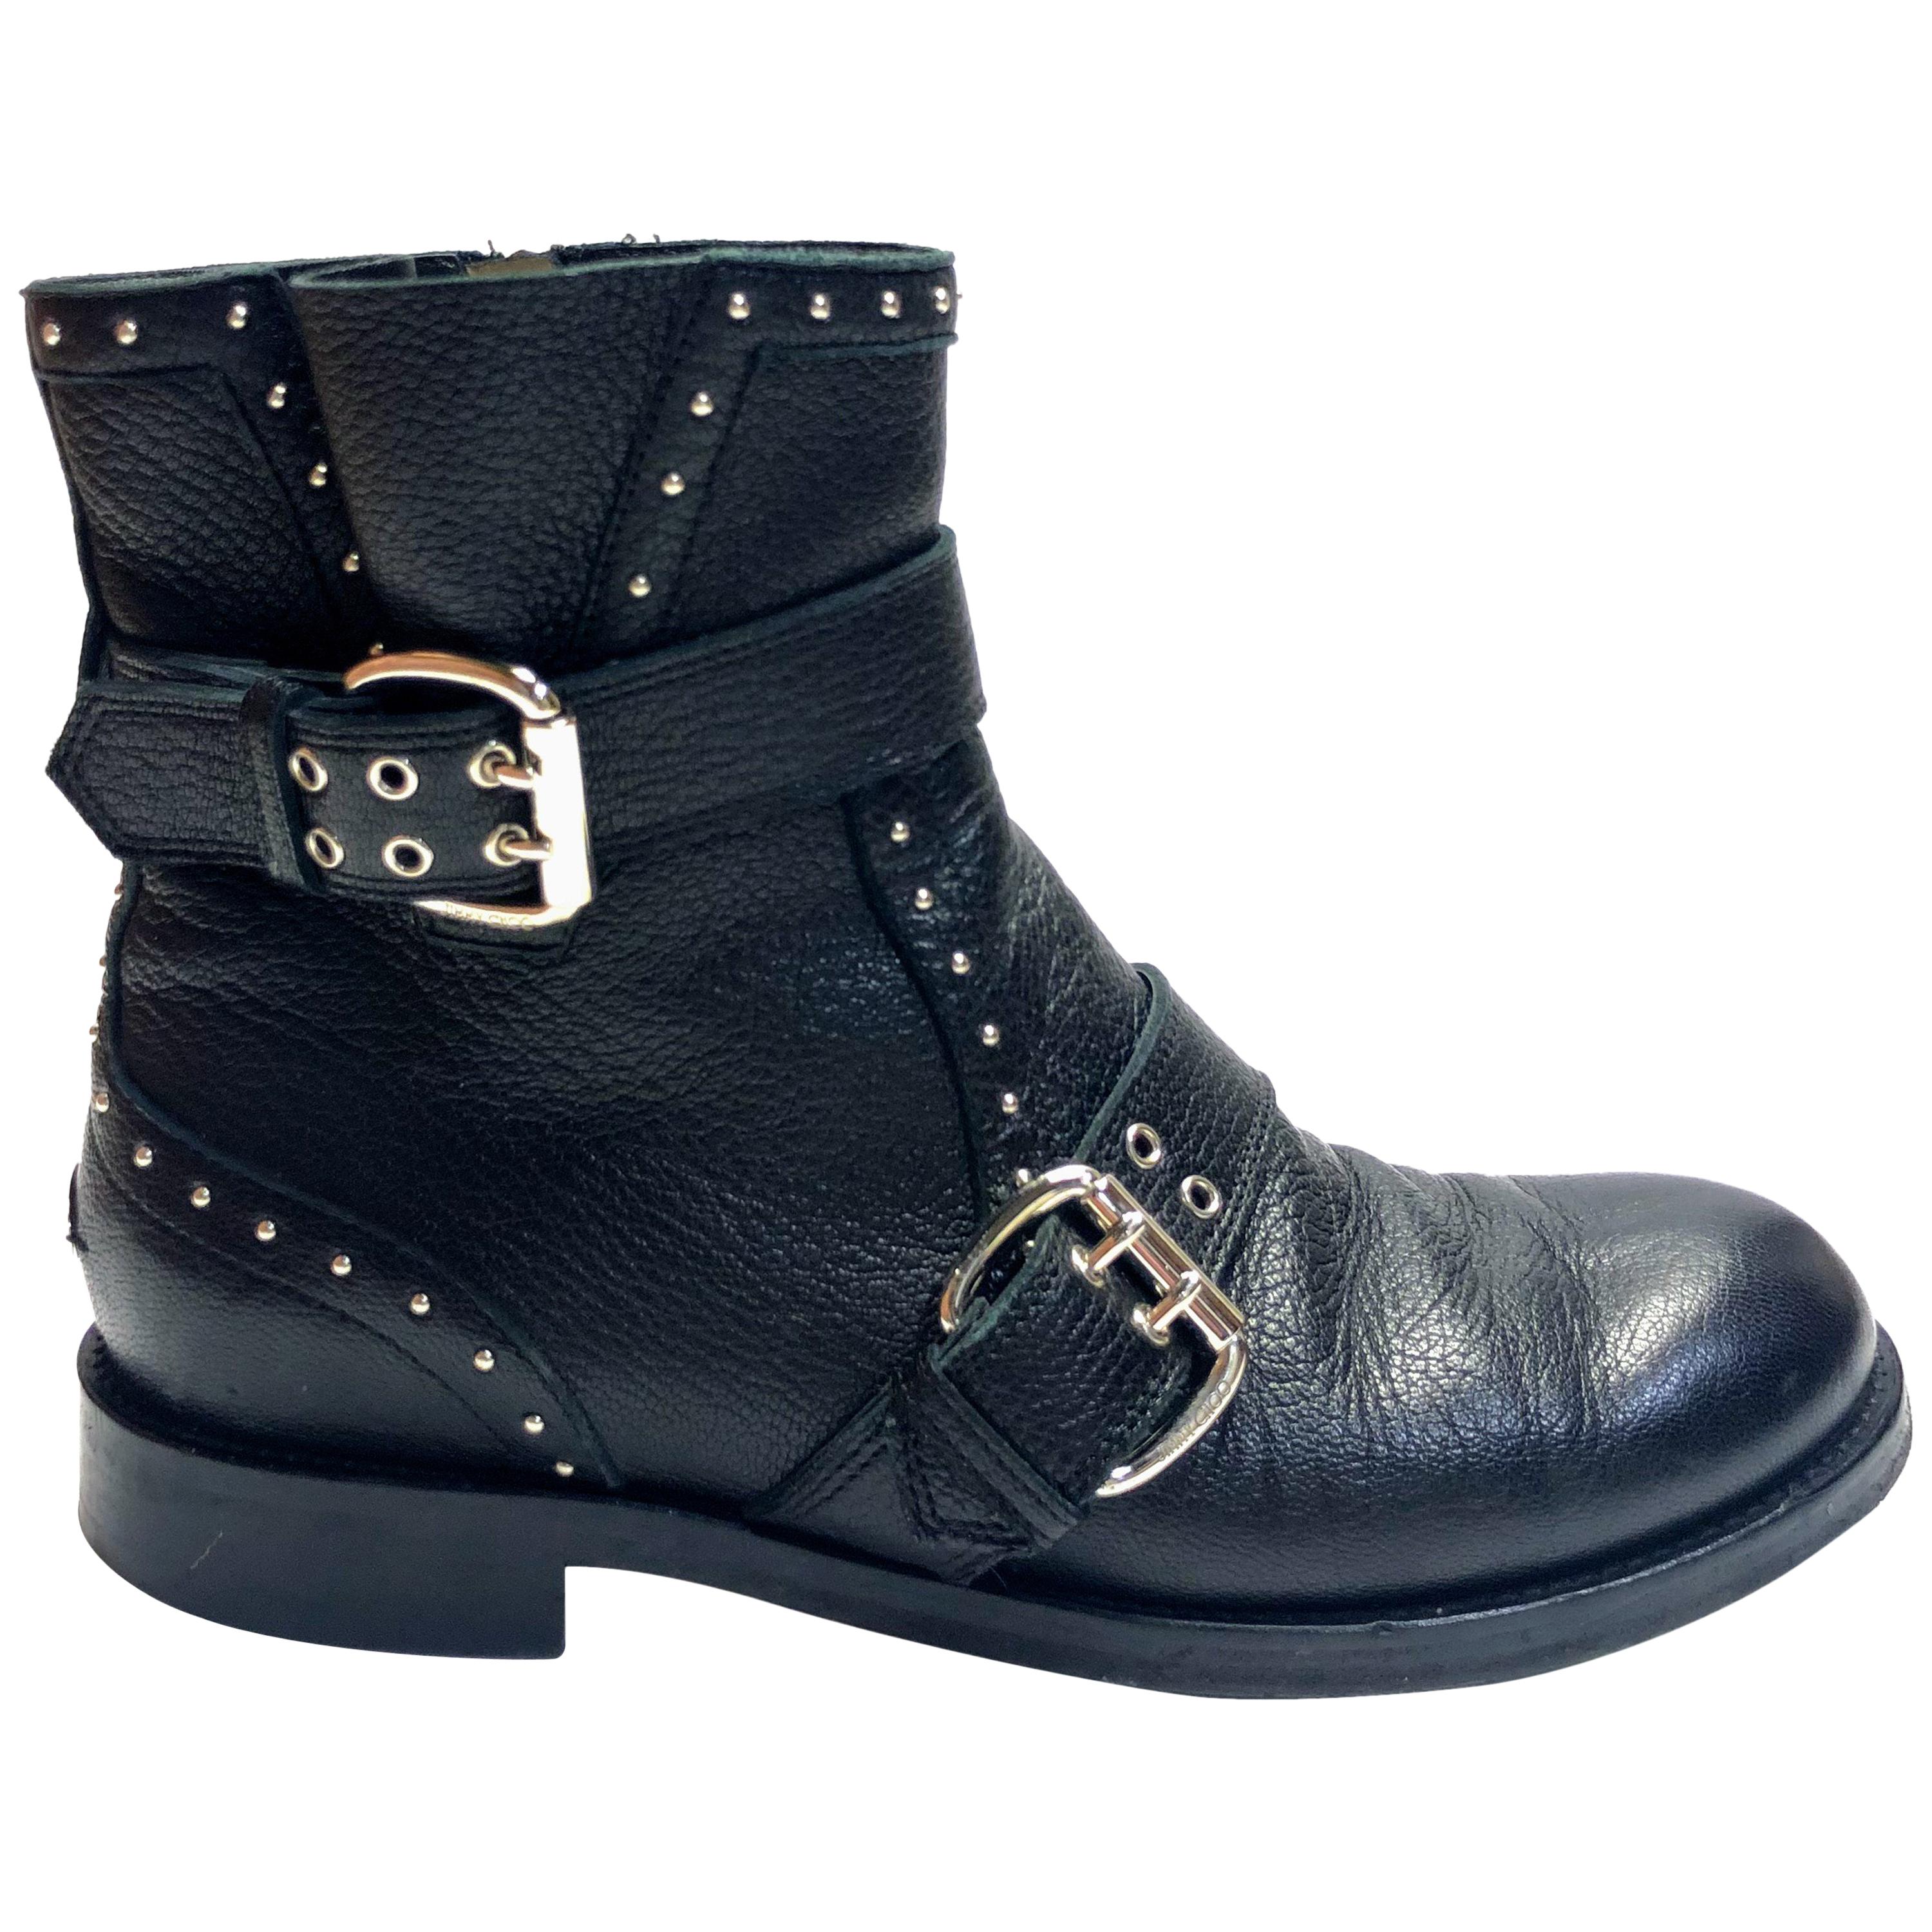 Jimmy Choo Silver Studded Ankle Boots